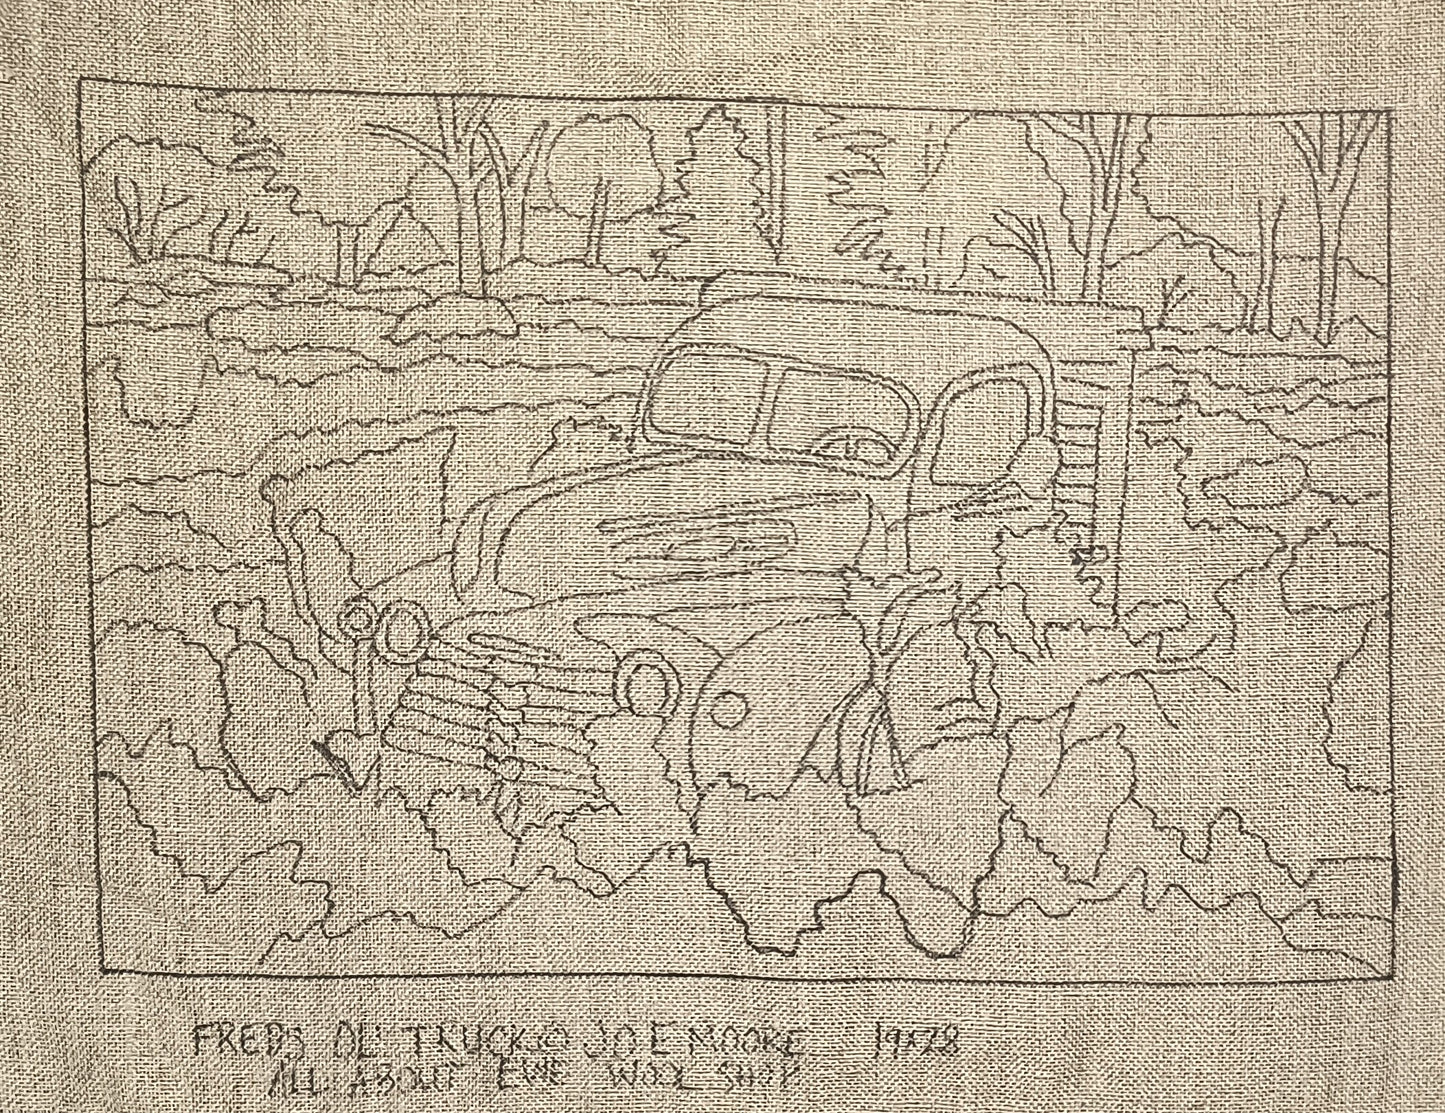 a drawing of an old truck in a field